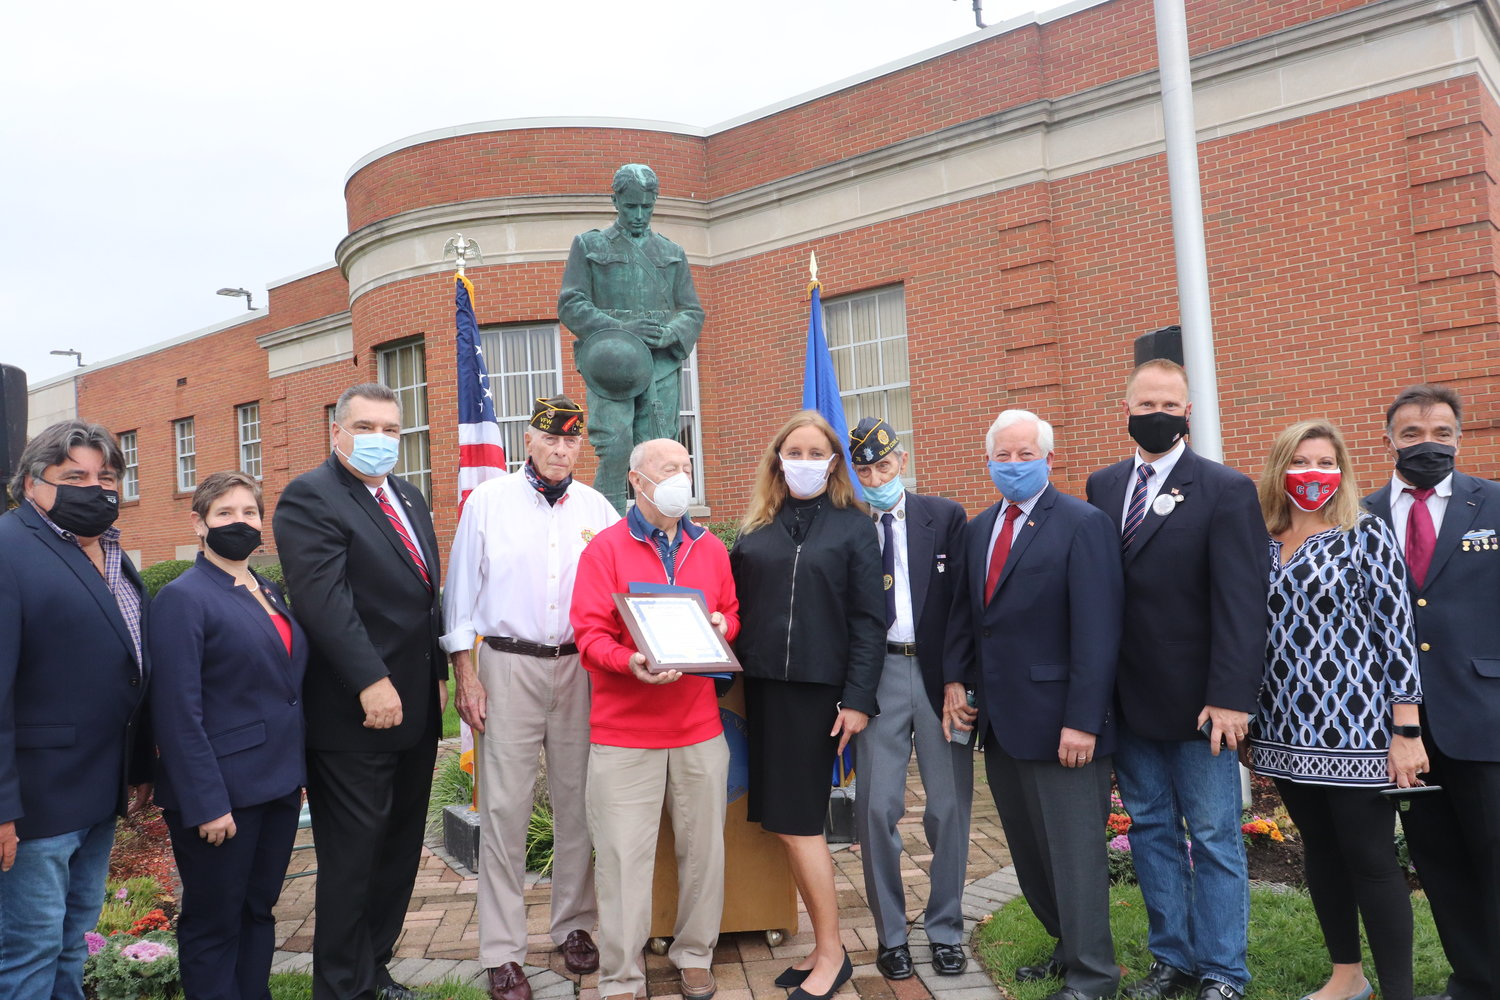 Local officials and veterans gathered at the Glen Cove Doughboy monument to honor veterans on Wednesday.